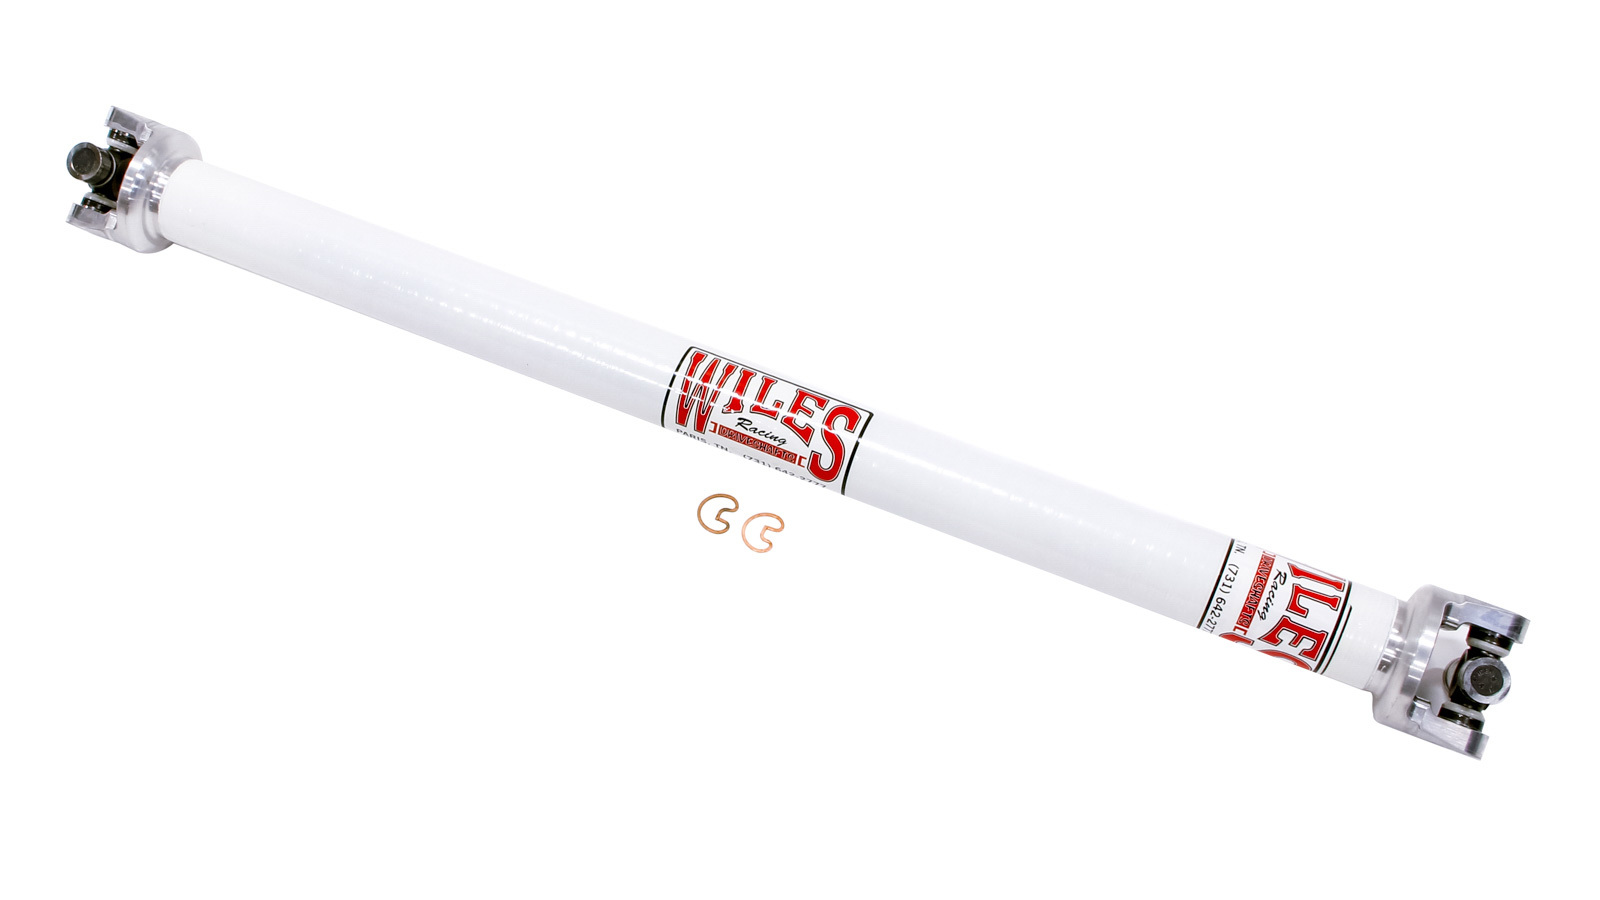 Wiles Driveshaft CF225325 Drive Shaft, 32.500 in Long, 2.25 in OD, 1310 U-Joints, Carbon Fiber, White Paint, Universal, Each